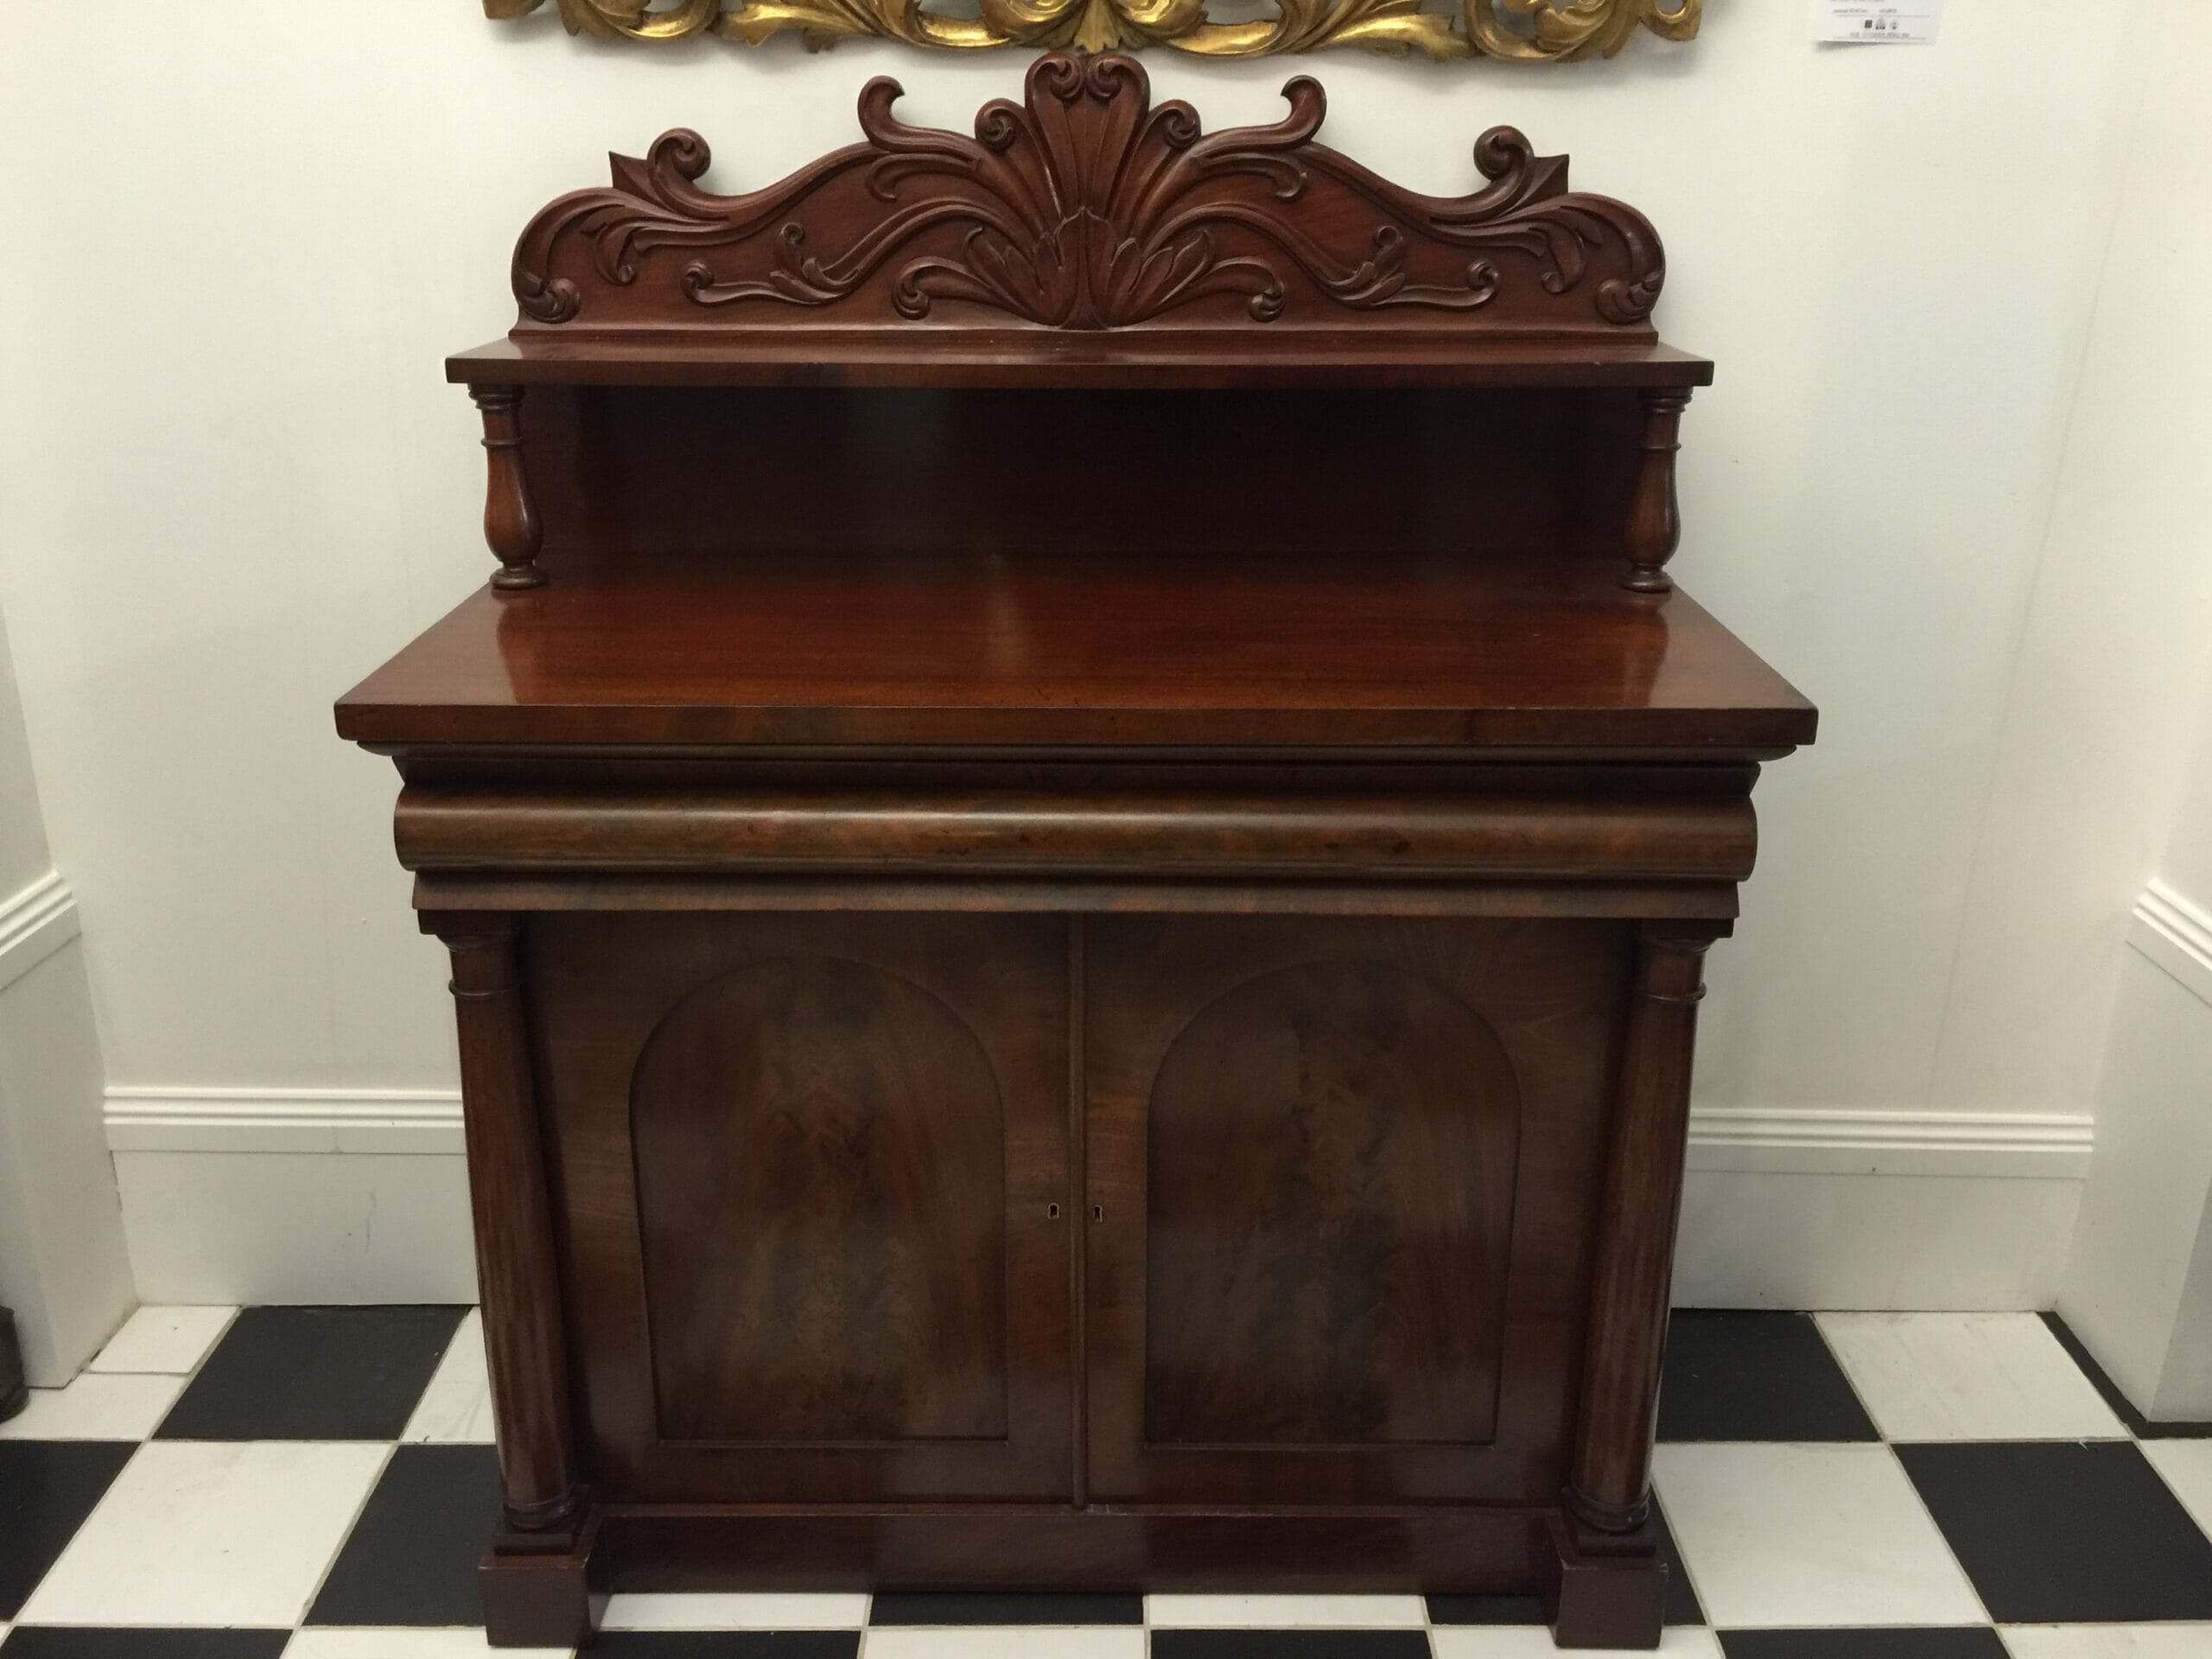 Regency mahogany chiffonier with nicely detailed scroll back, c. 1825-0